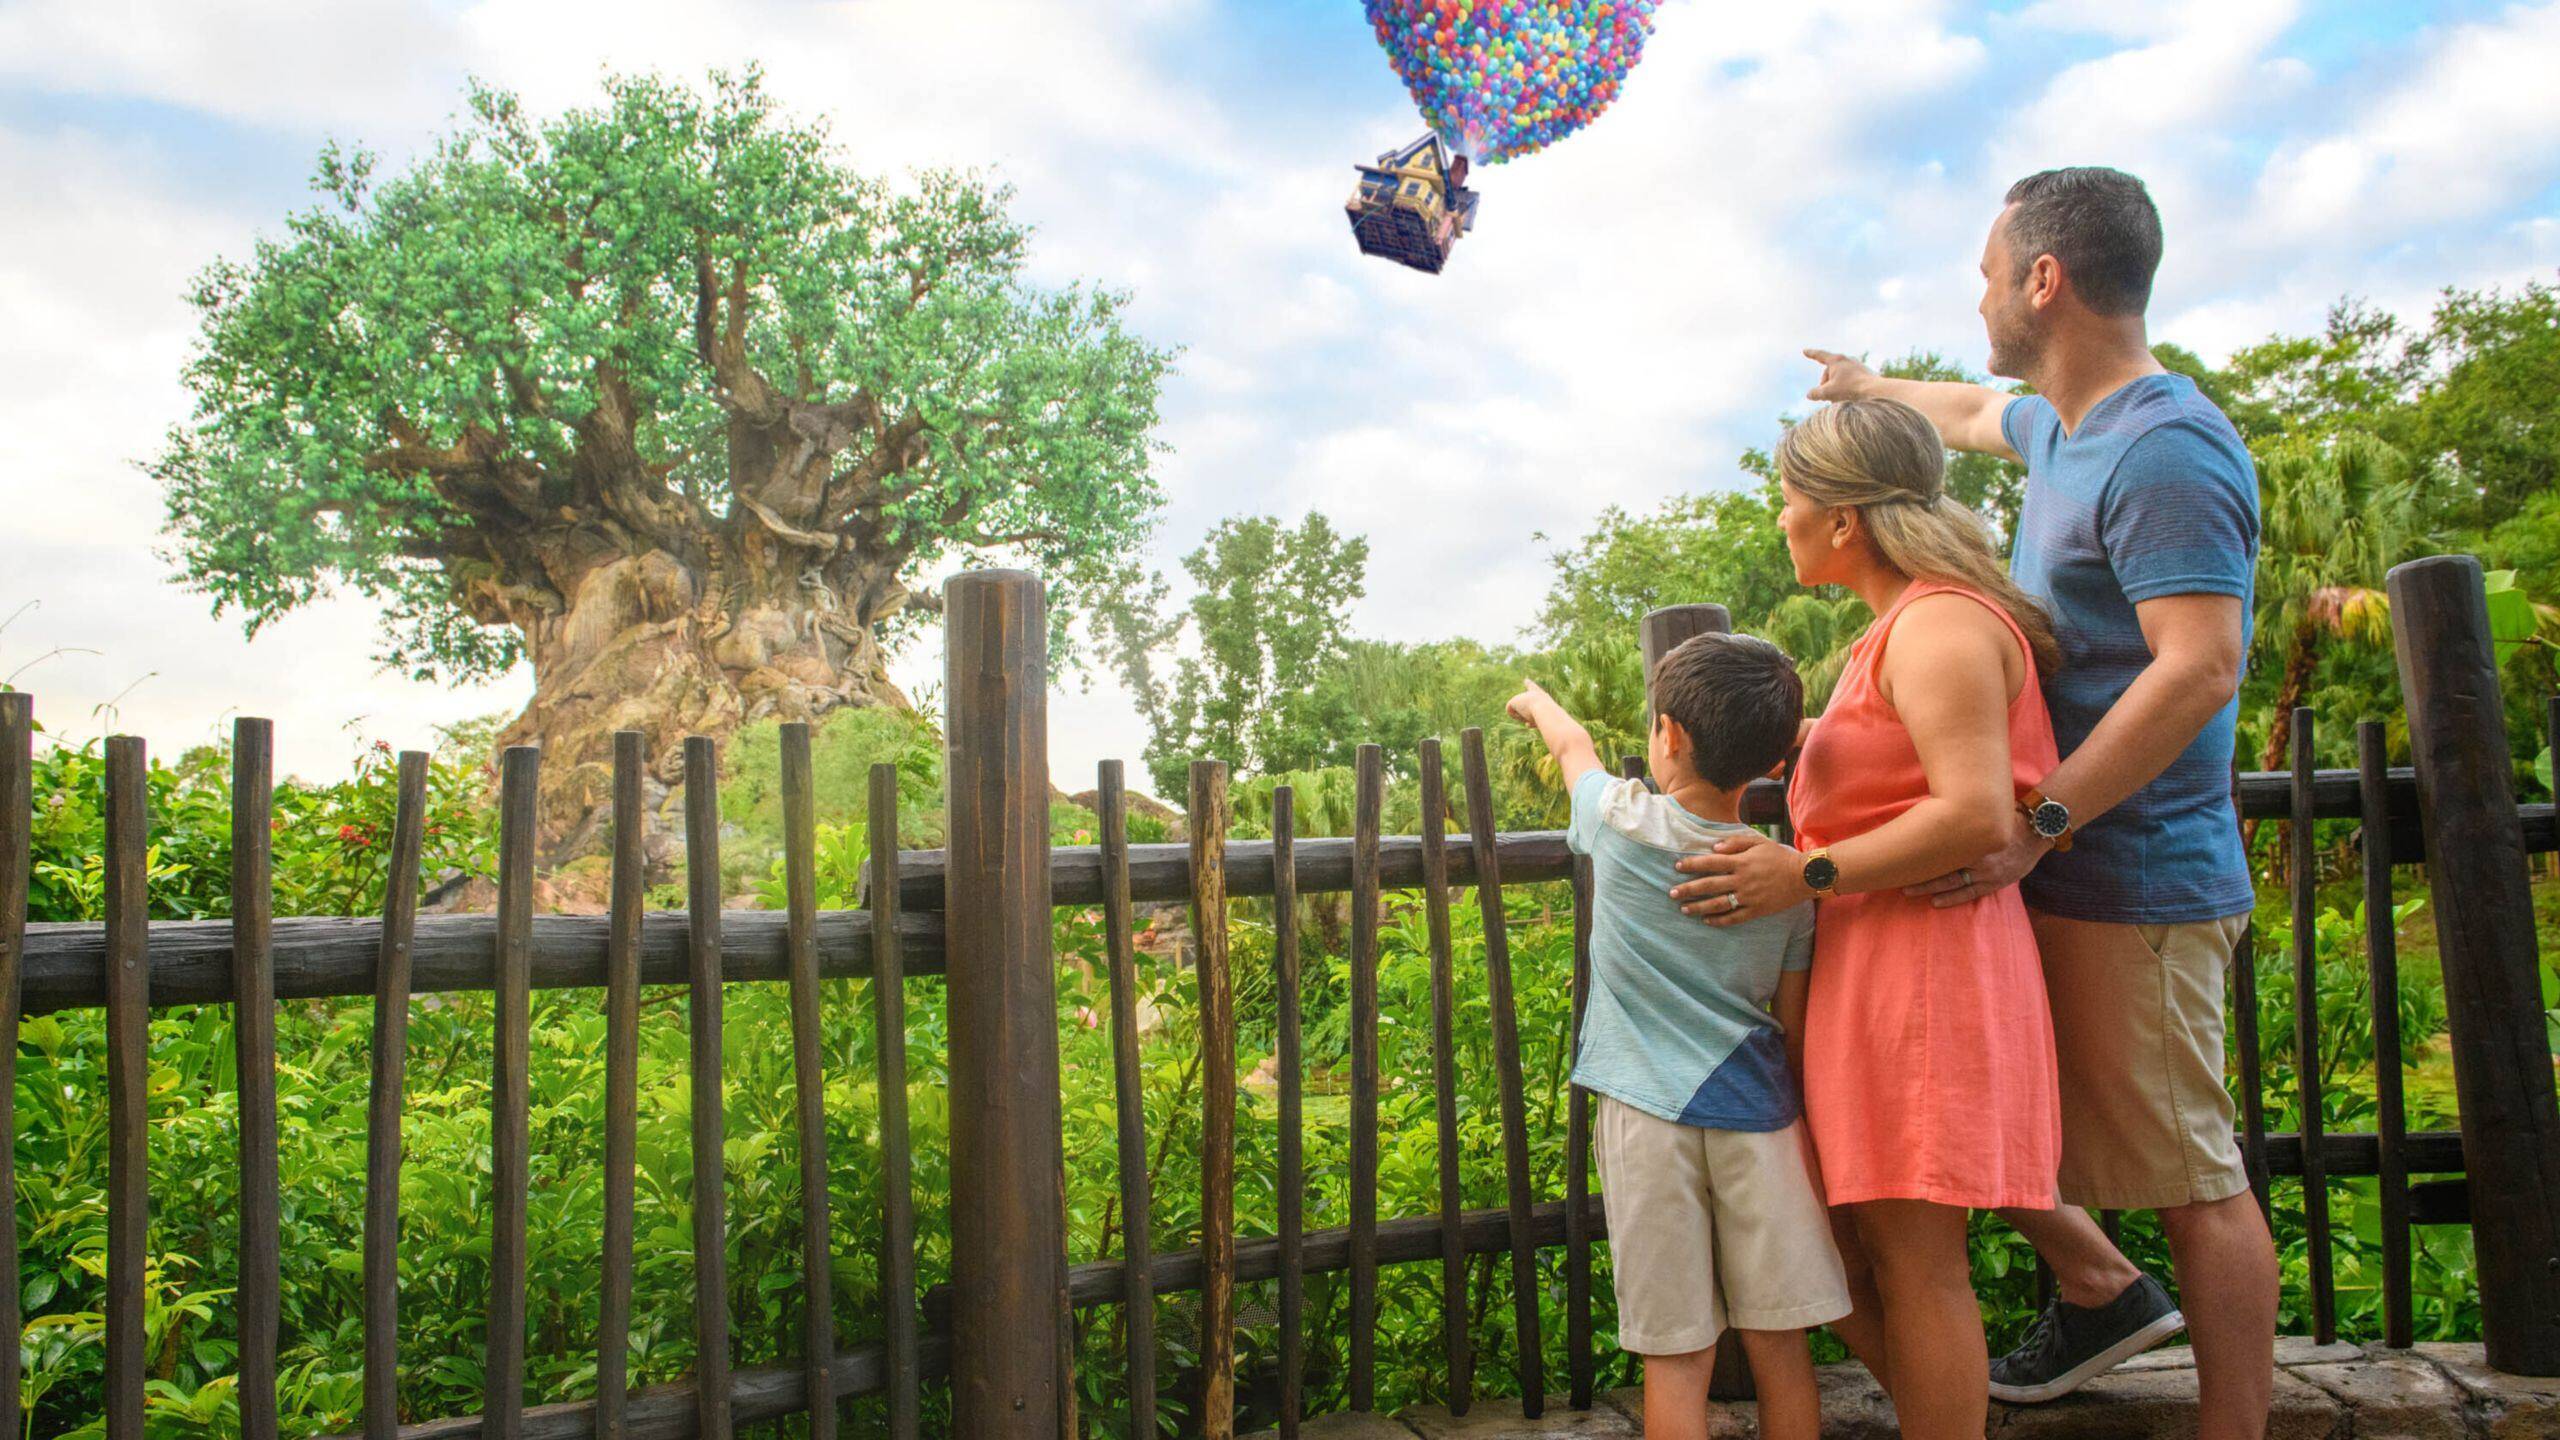 Coming soon to Disney's Animal Kingdom - Passholder exclusive PhotoPass Magic Shot inspired by the Disney and Pixar film Up